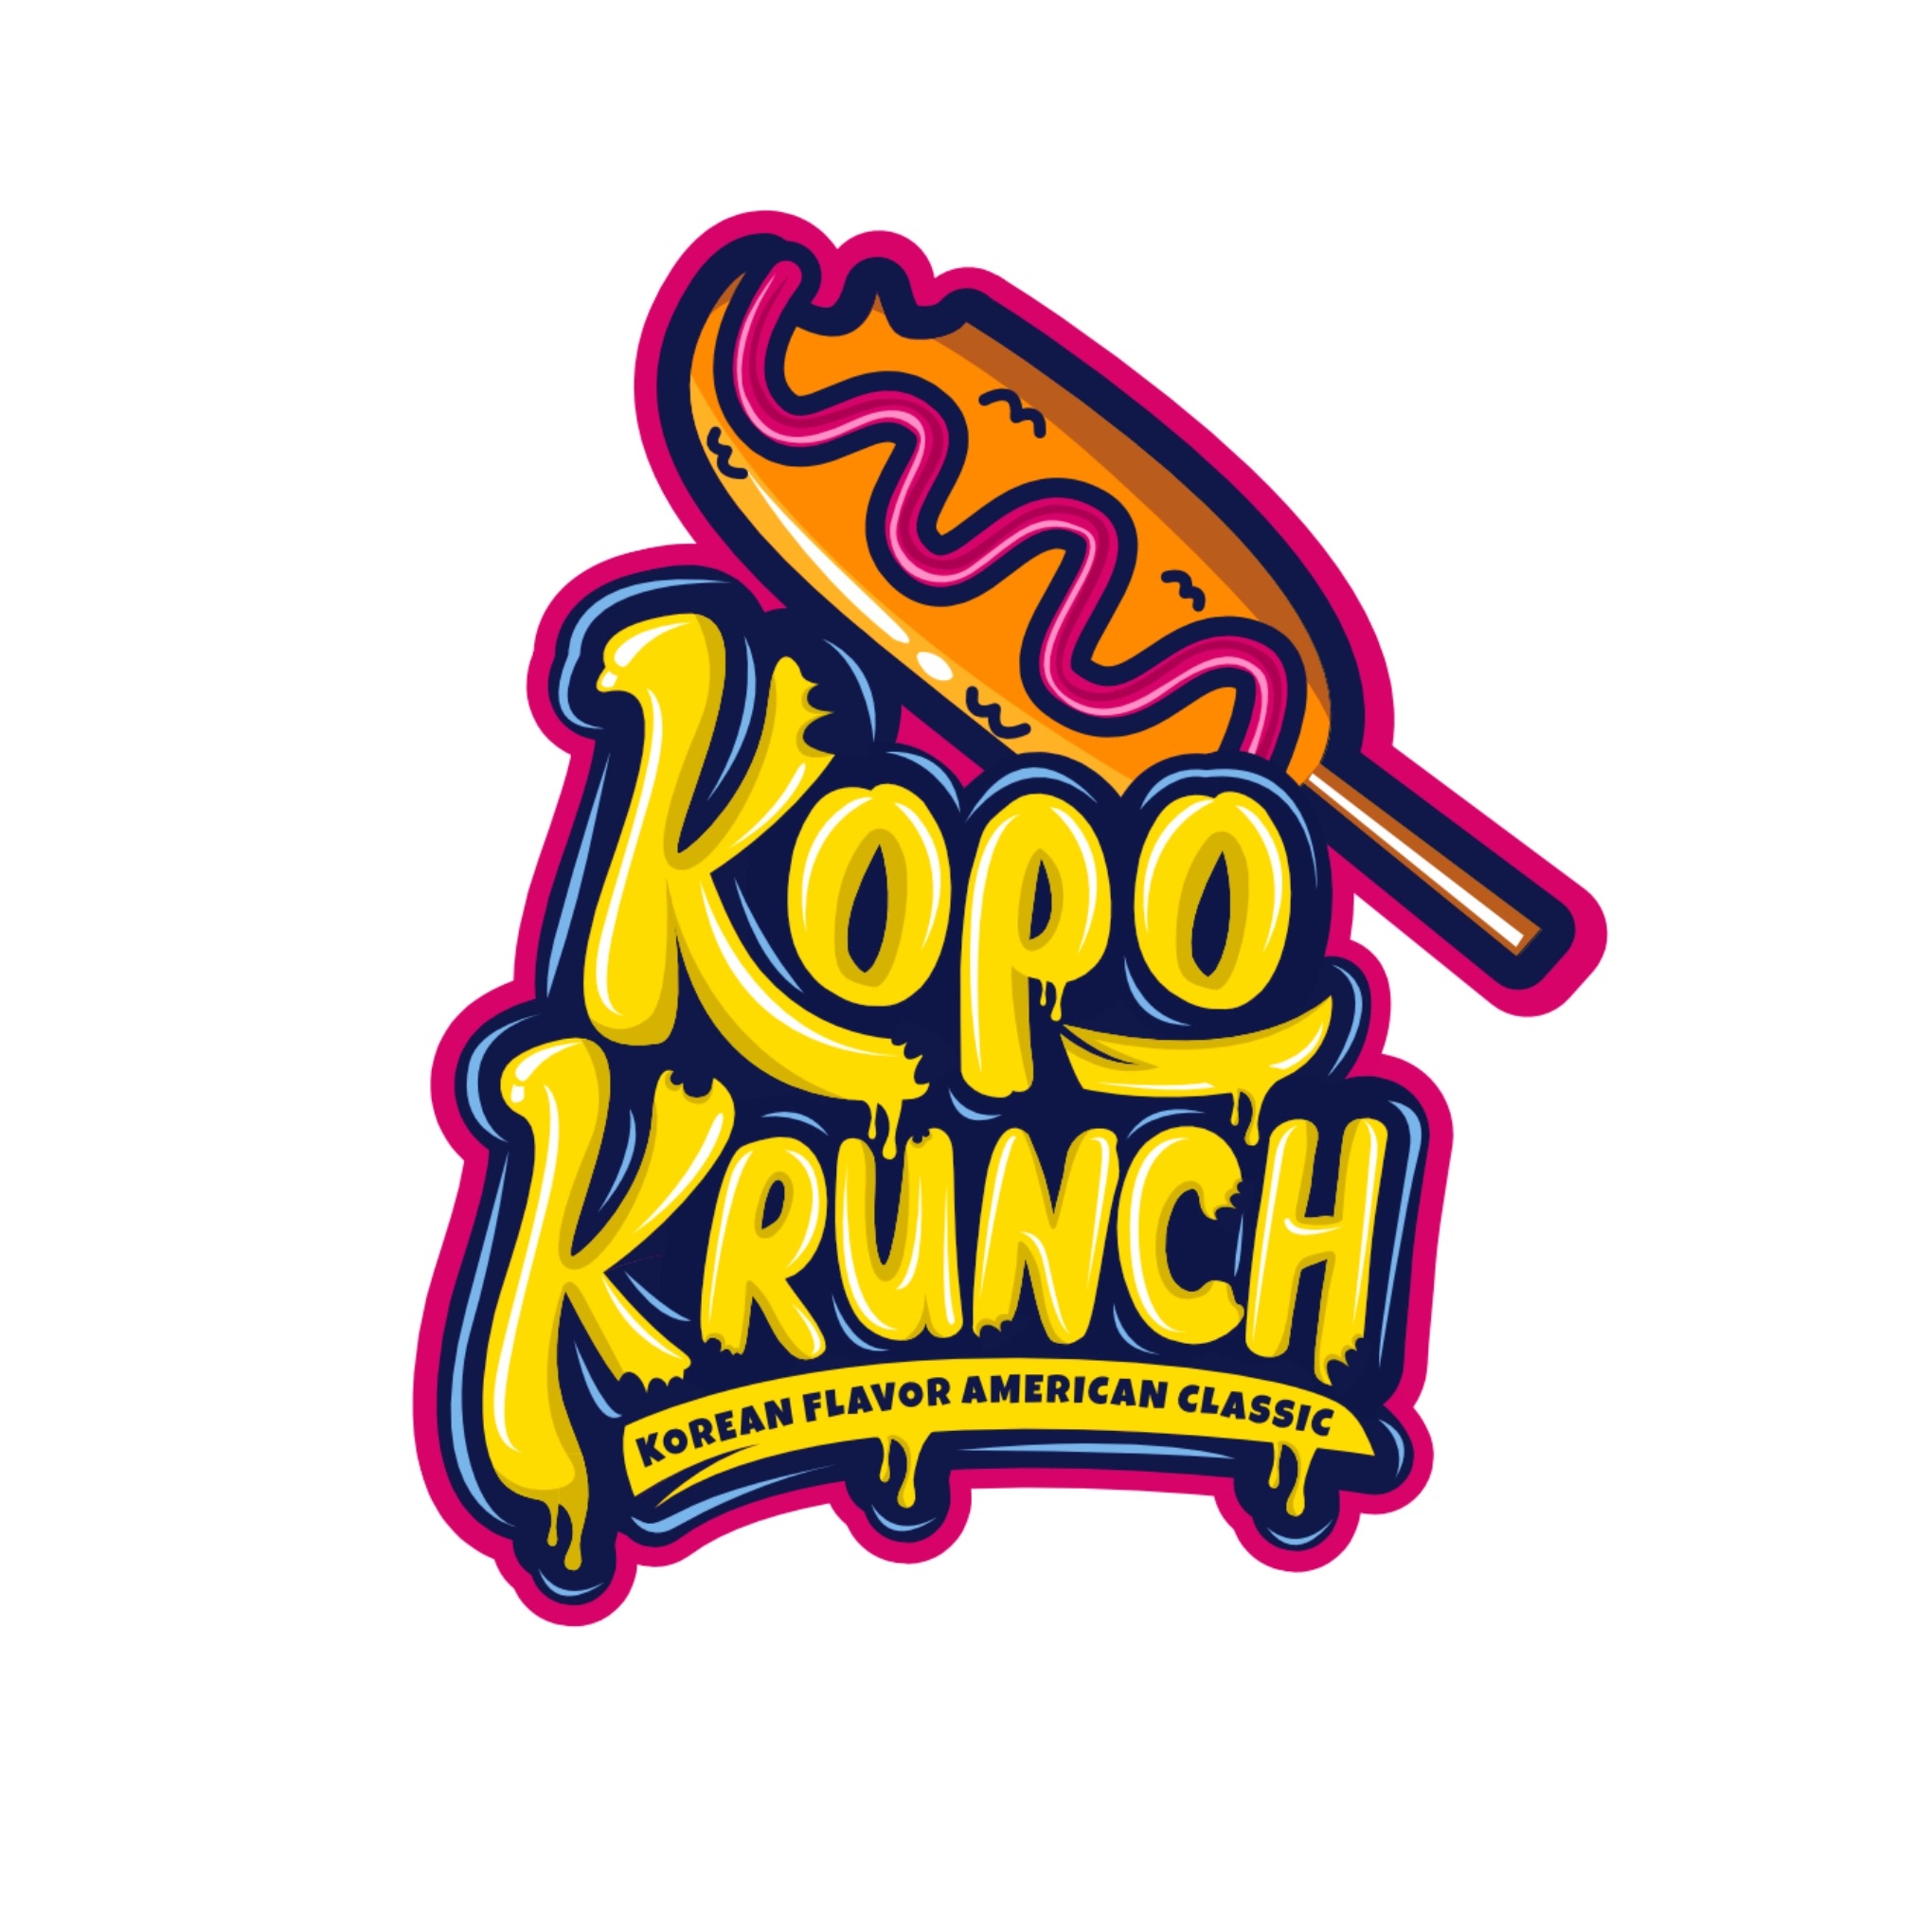 KOPO KRUNCH Introduces Korean Corn Dogs at Northridge Fashion Center – Grand Opening This Friday